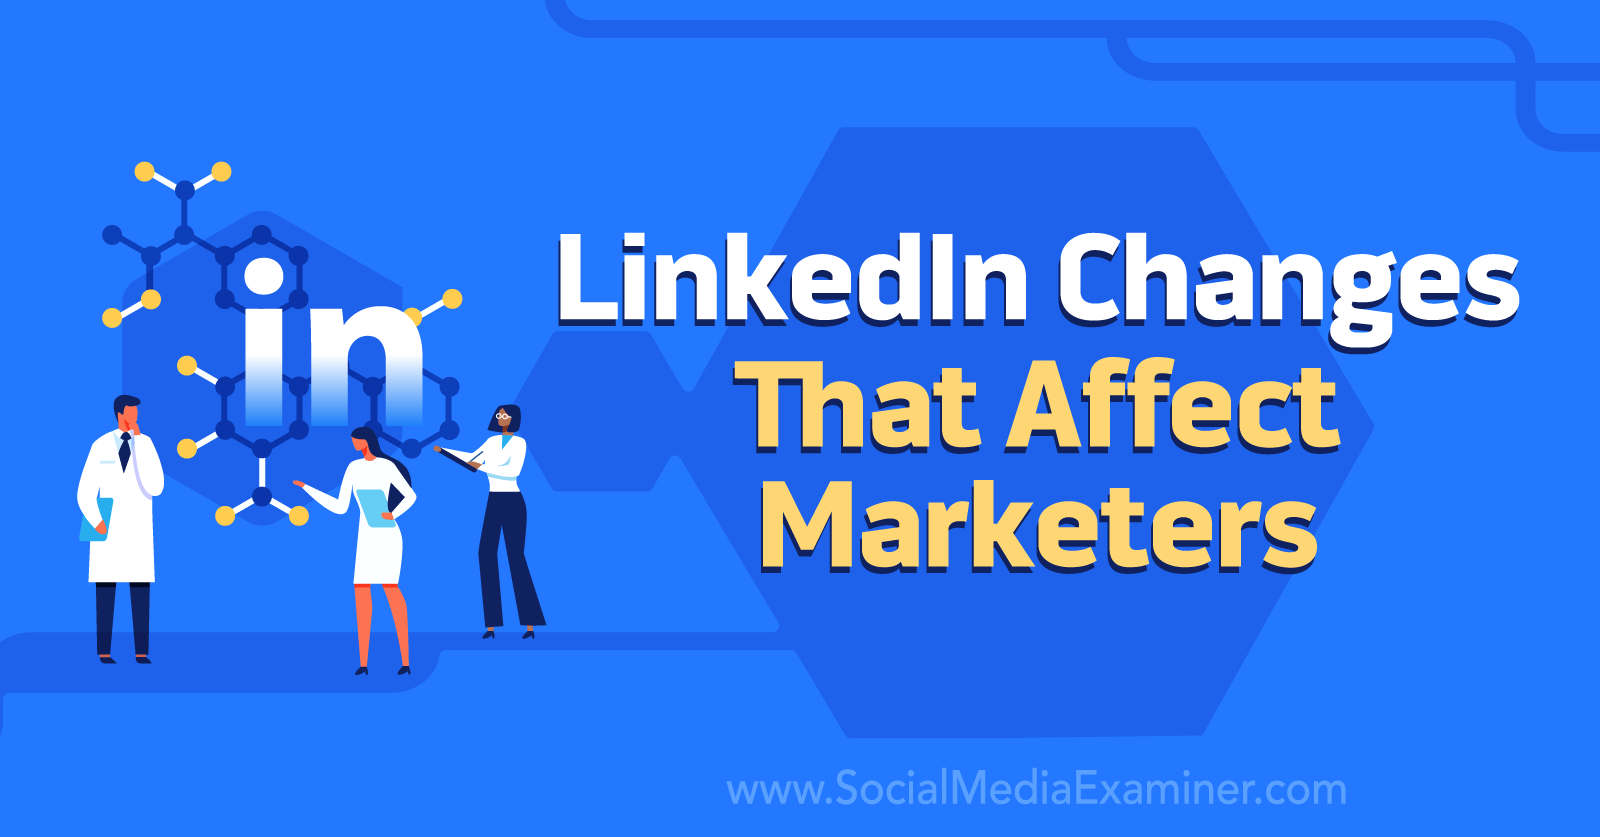 LinkedIn Changes That Affect Marketers by Social Media Examiner